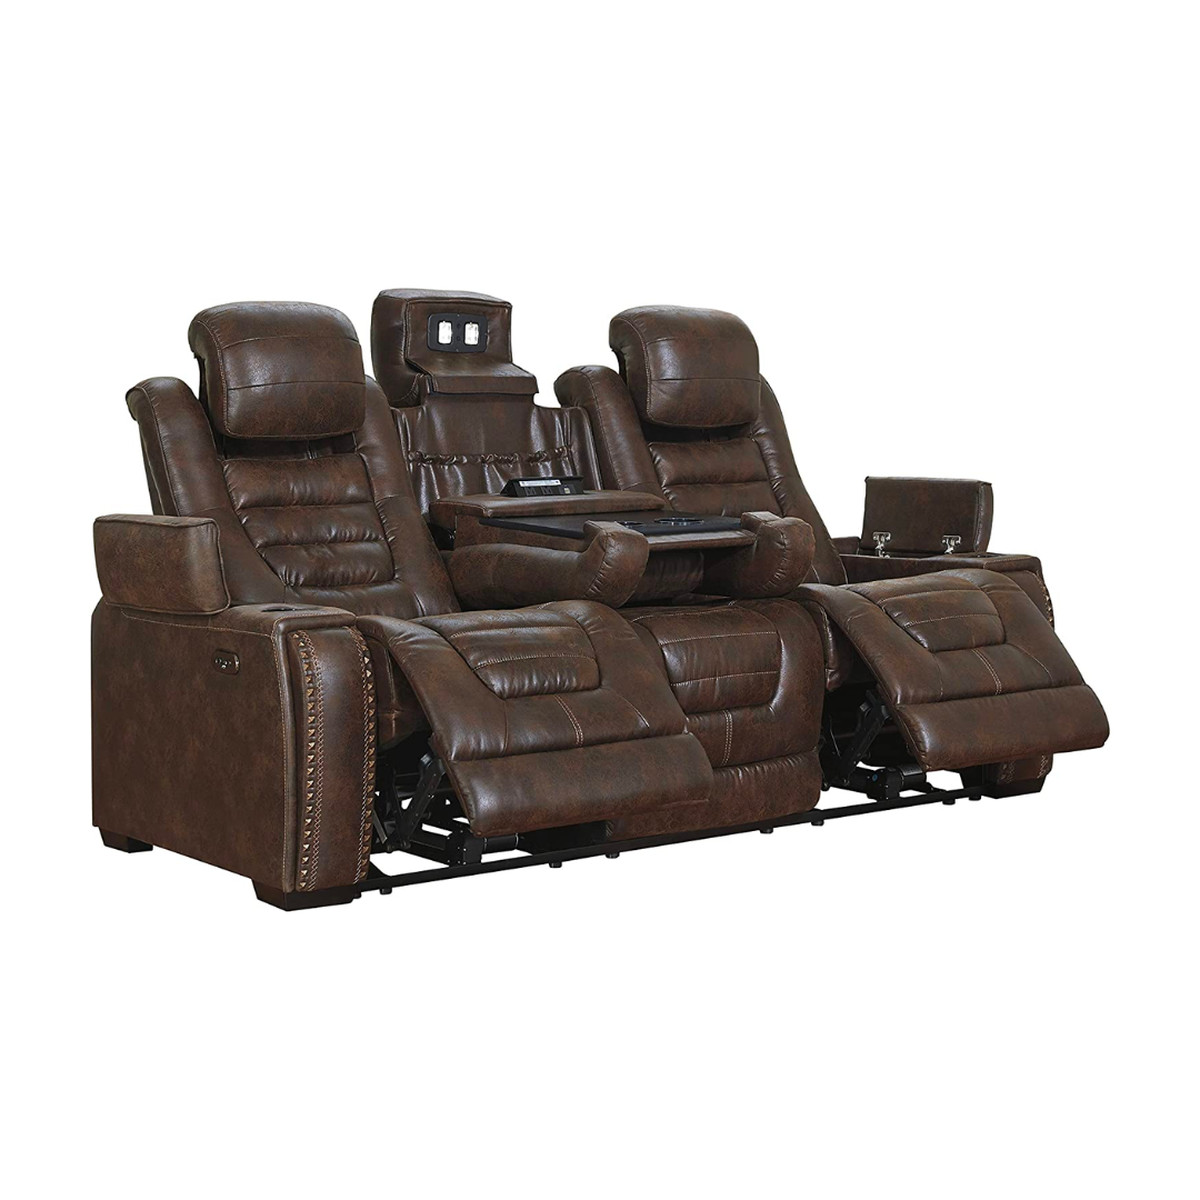 Signature Design by Ashley Reclining Sofa in brown with featured console and storage